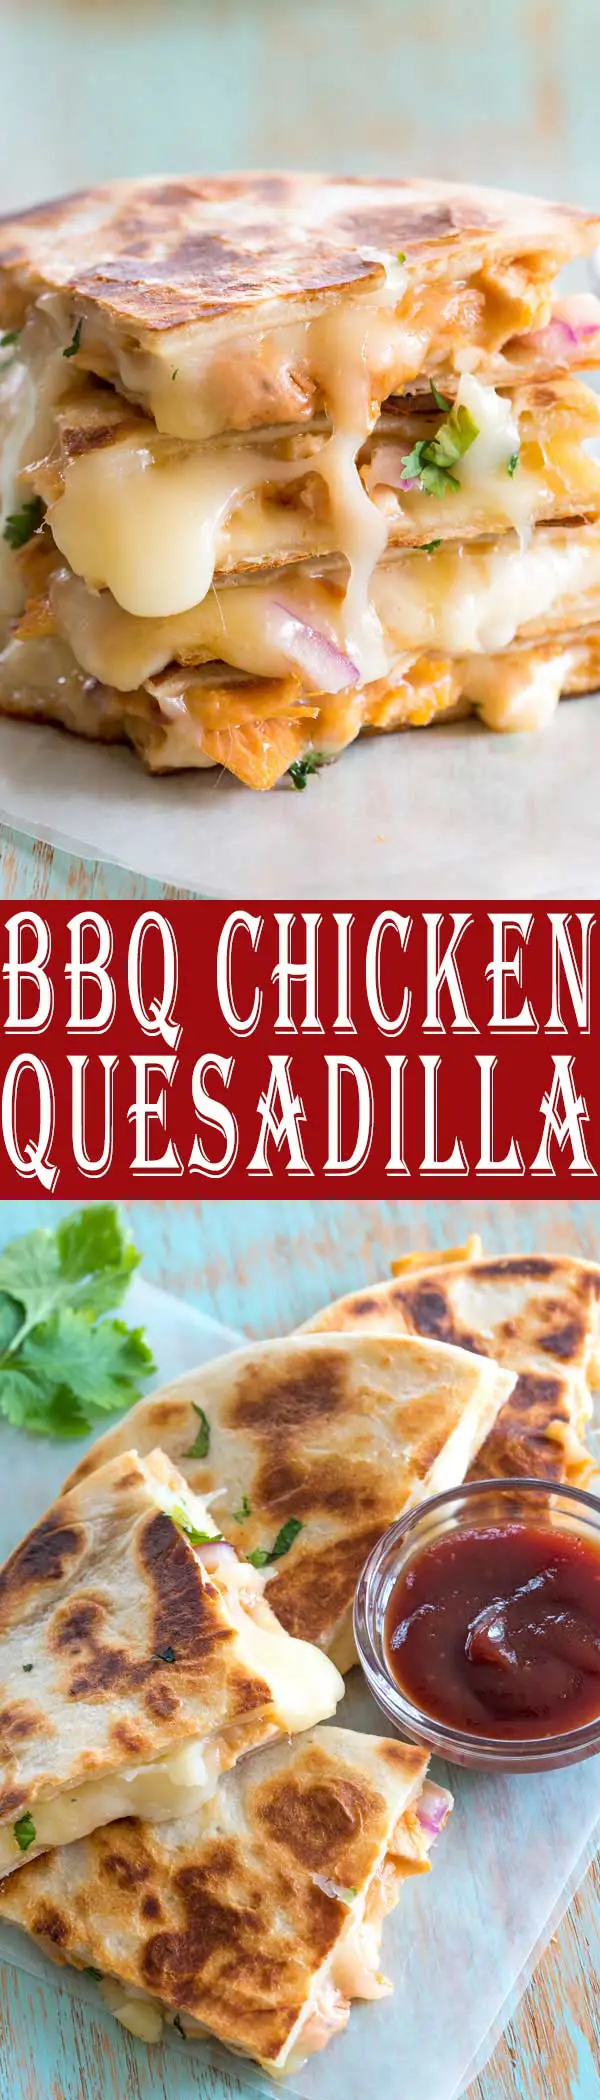 This tasty BBQ Chicken Quesadilla is based off my favorite barbecue chicken pizza! So simple and easy to make a quesadilla instead! #dinner #dinnerrecipes #appetizer #recipe